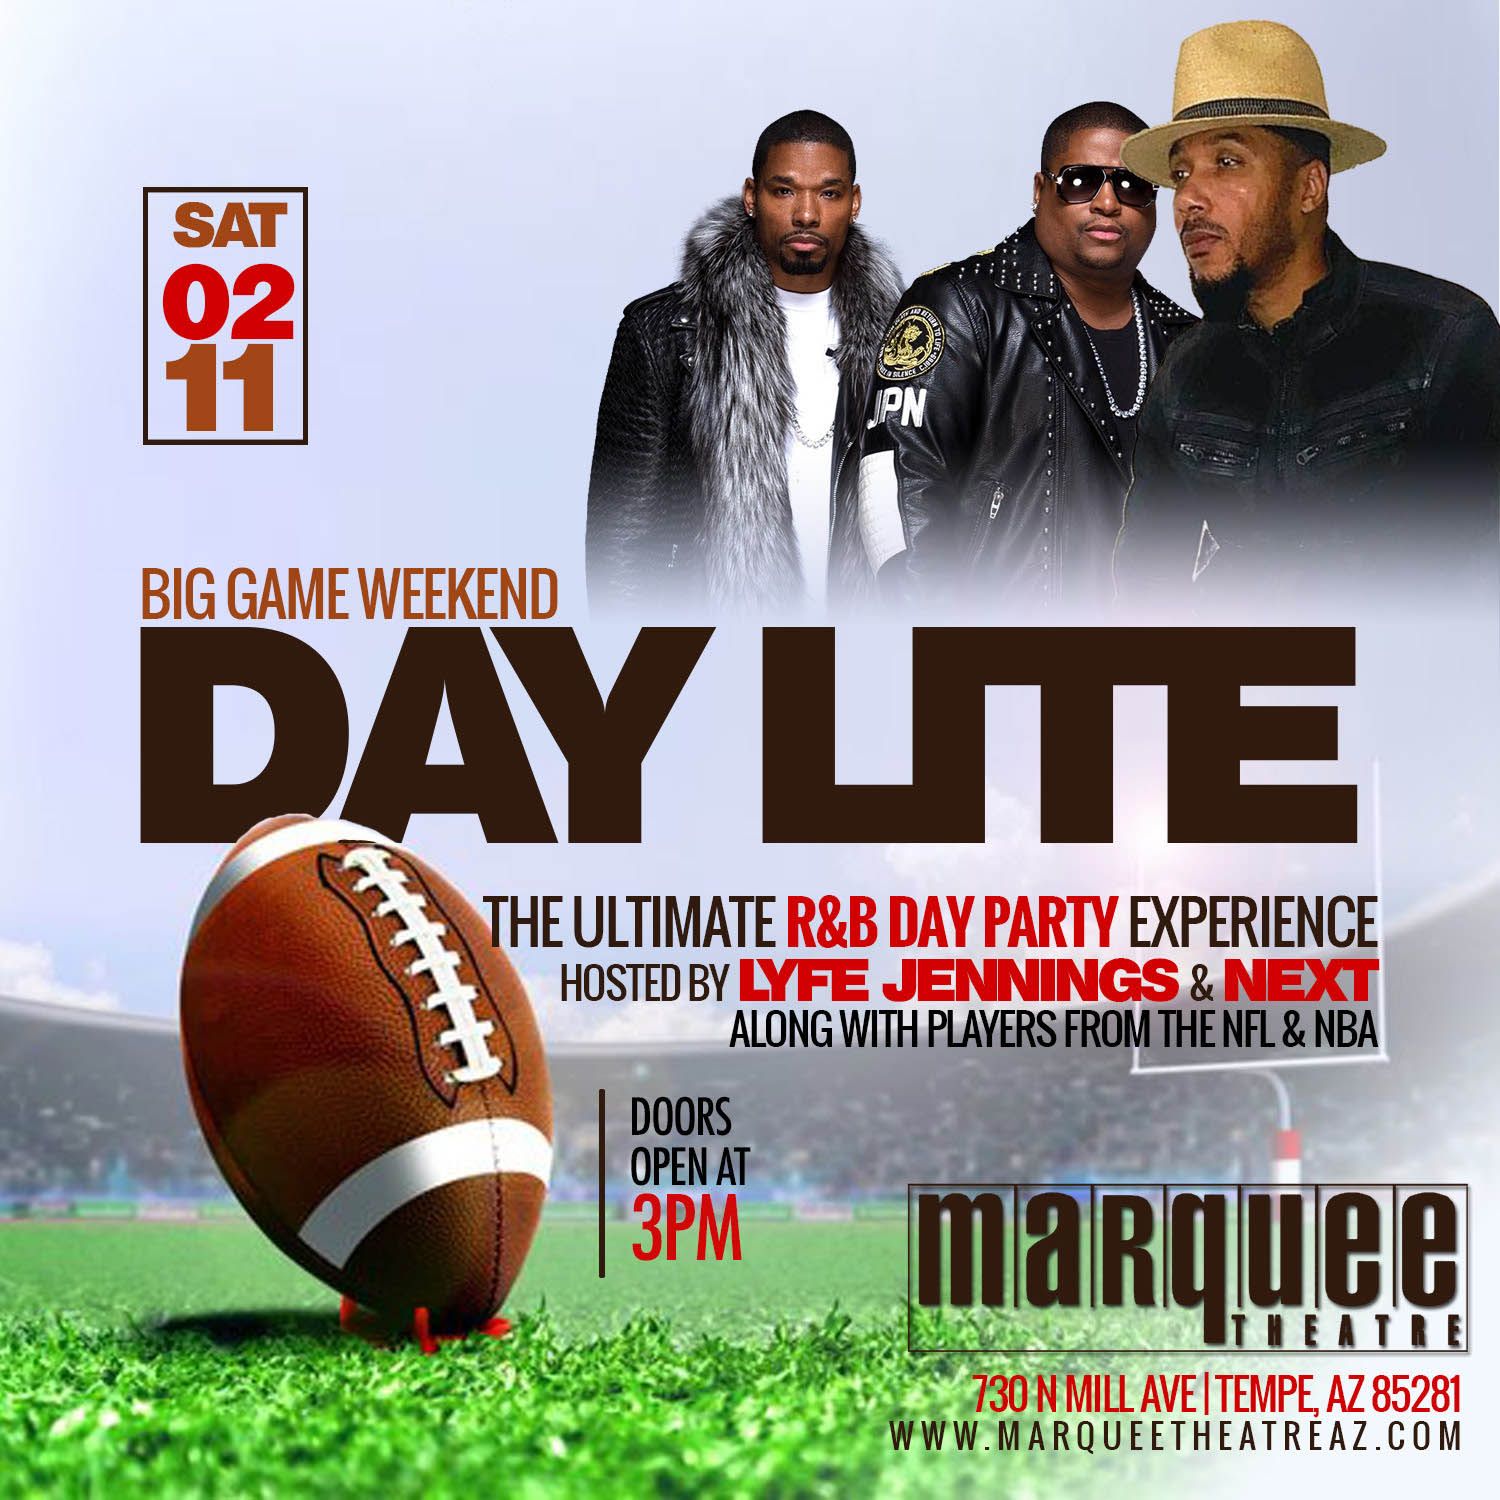 Day Lite - Big Game Weekend Kickoff at Marquee Theatre